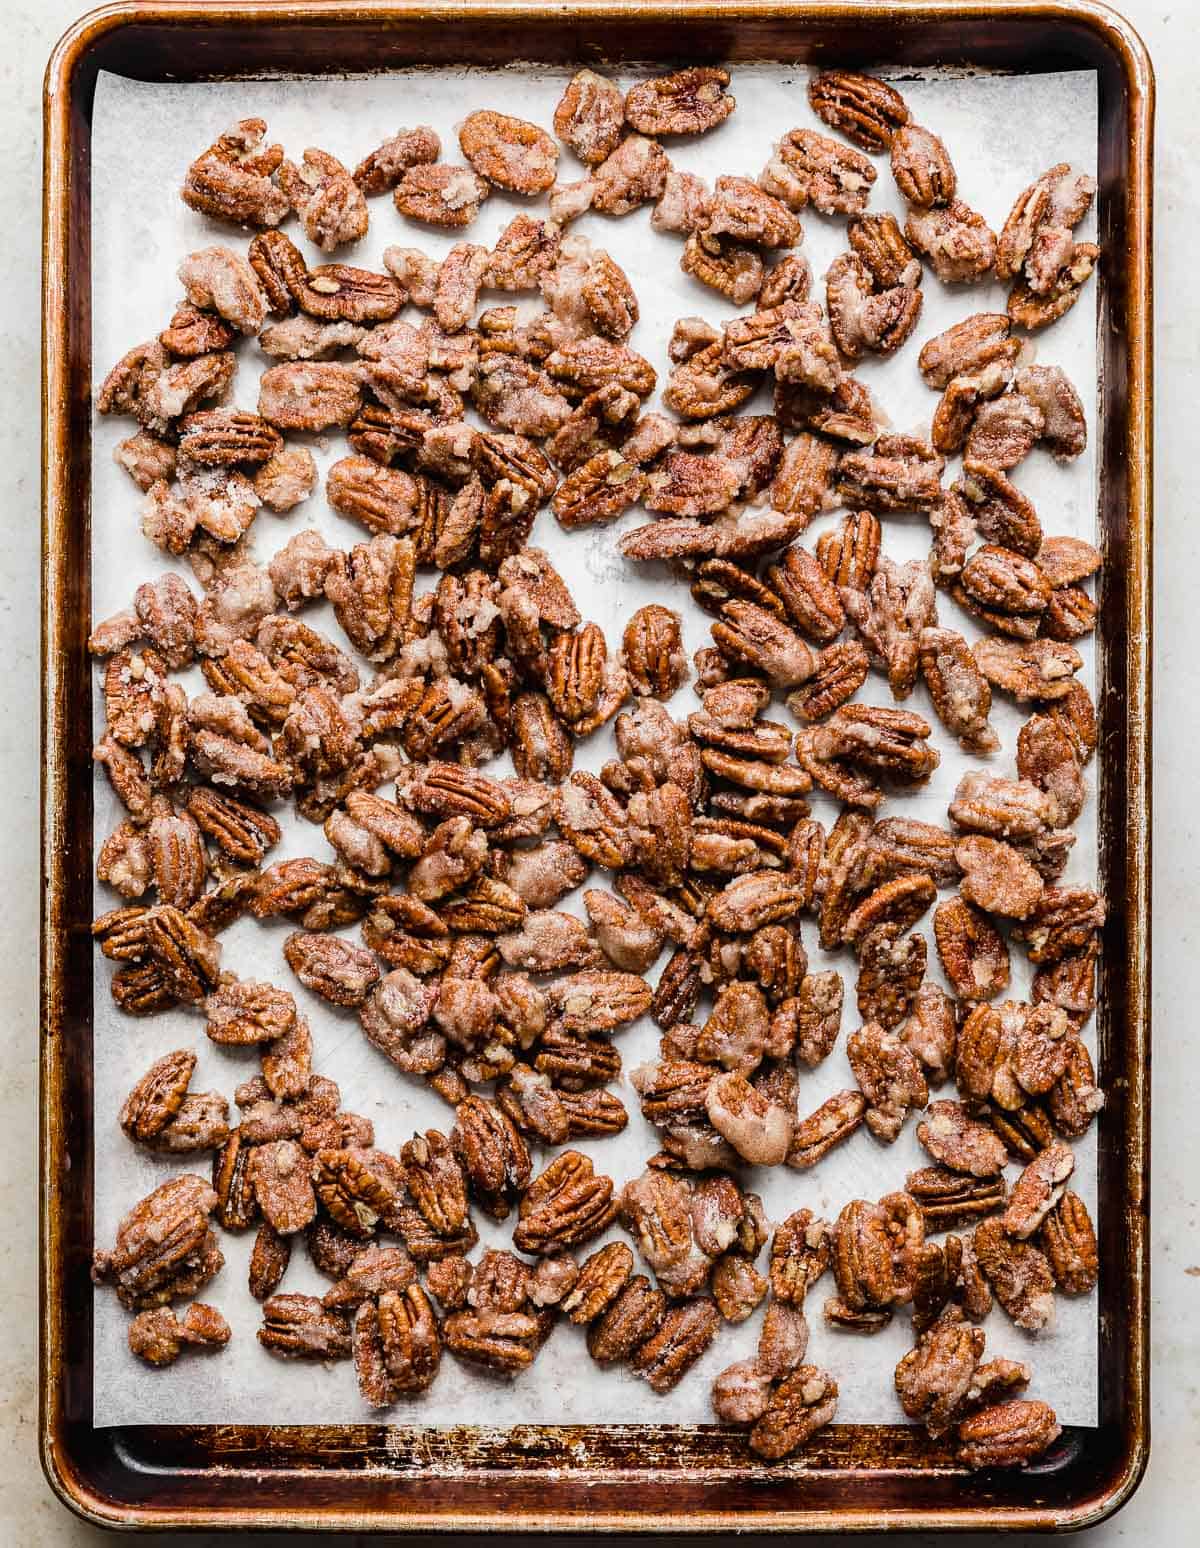 Roasted Candied Pecans on a baking sheet.